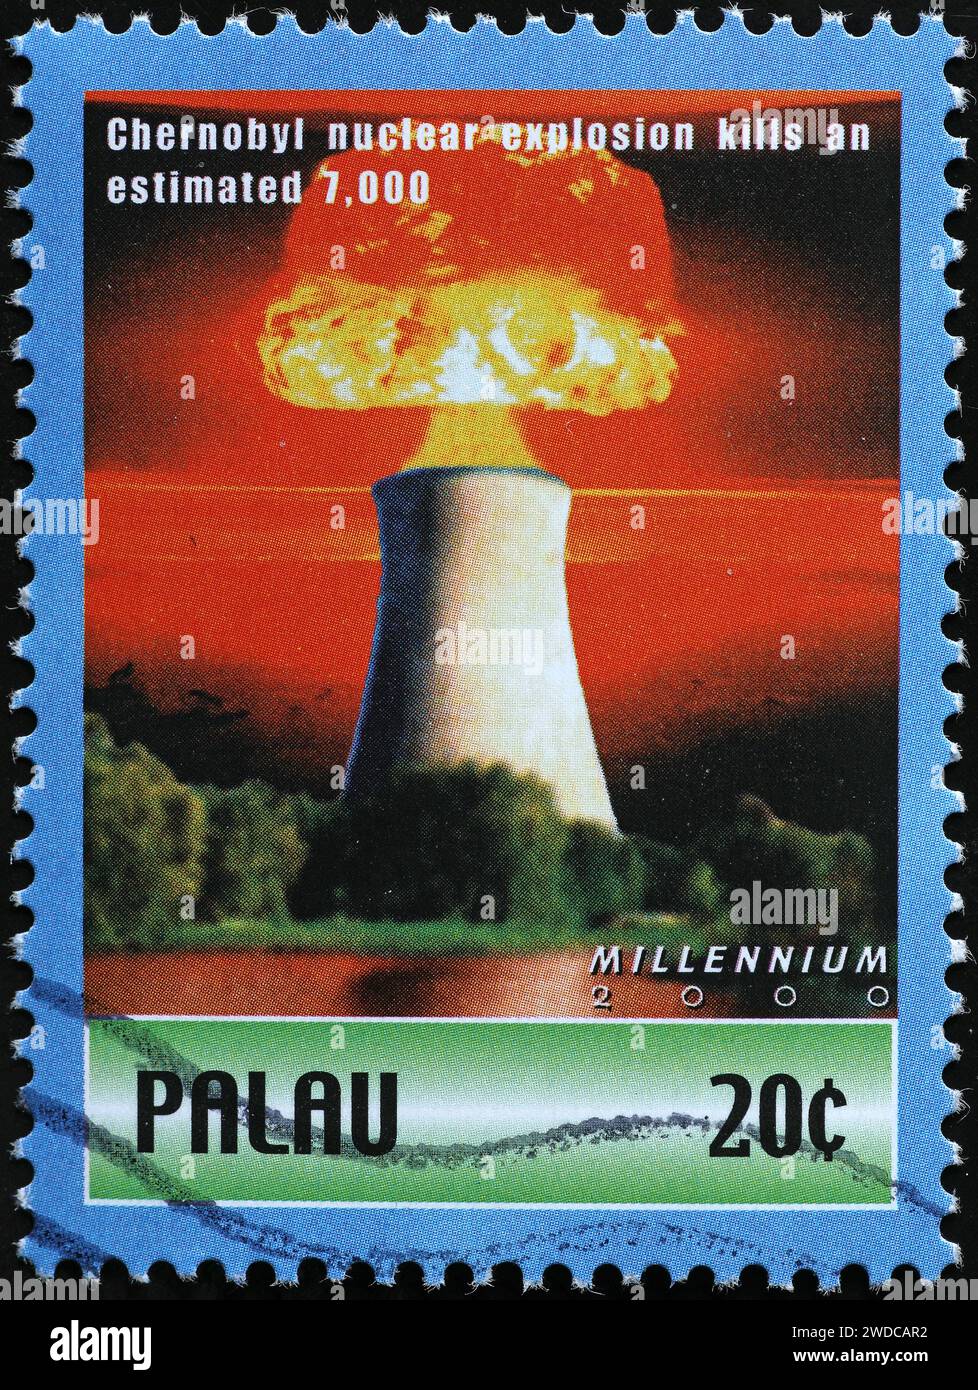 Chernobyl nuclear explosion remembered on postage stamp Stock Photo